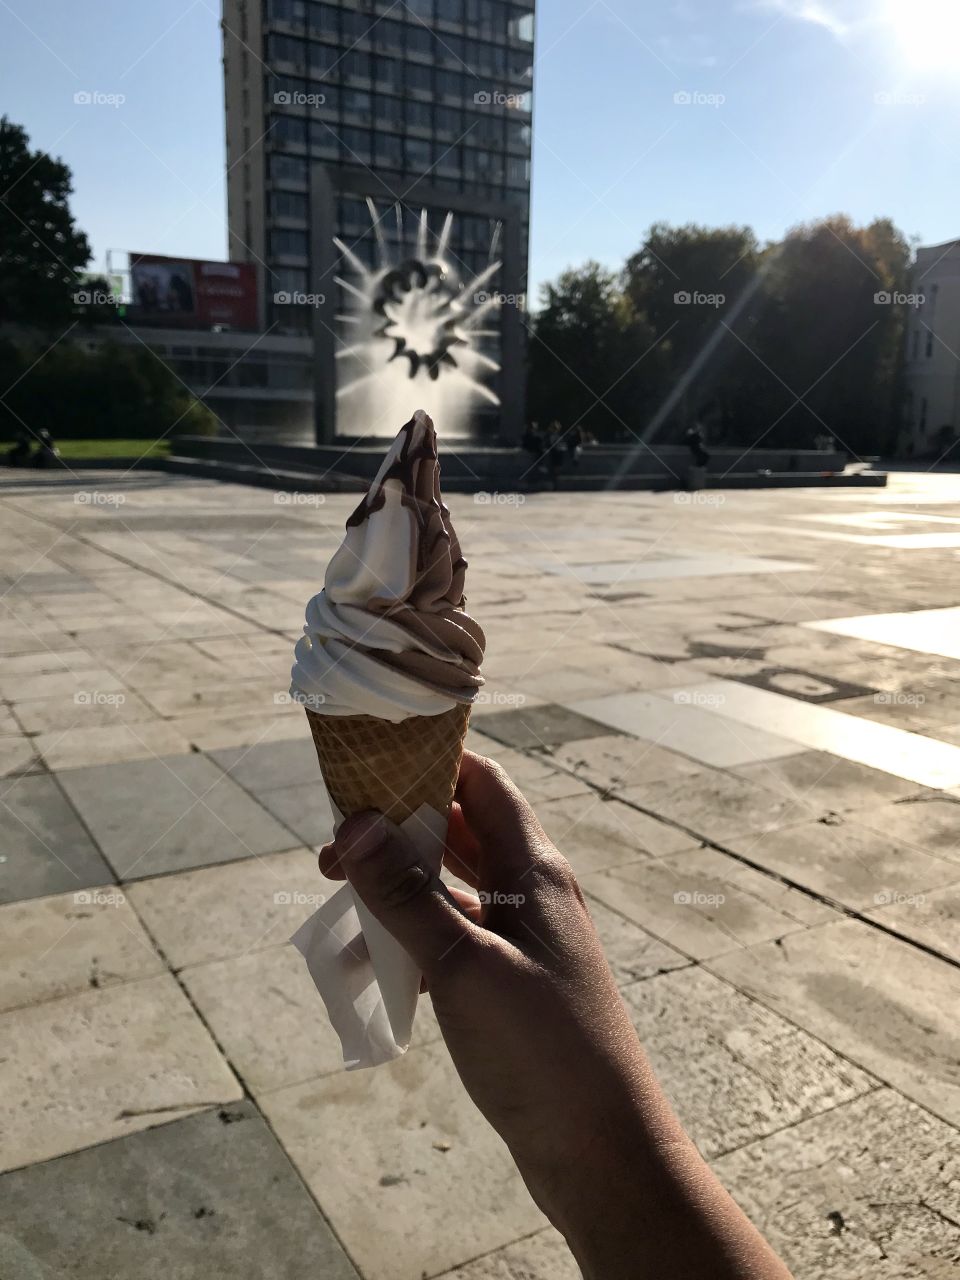 Ice creams and fountains 